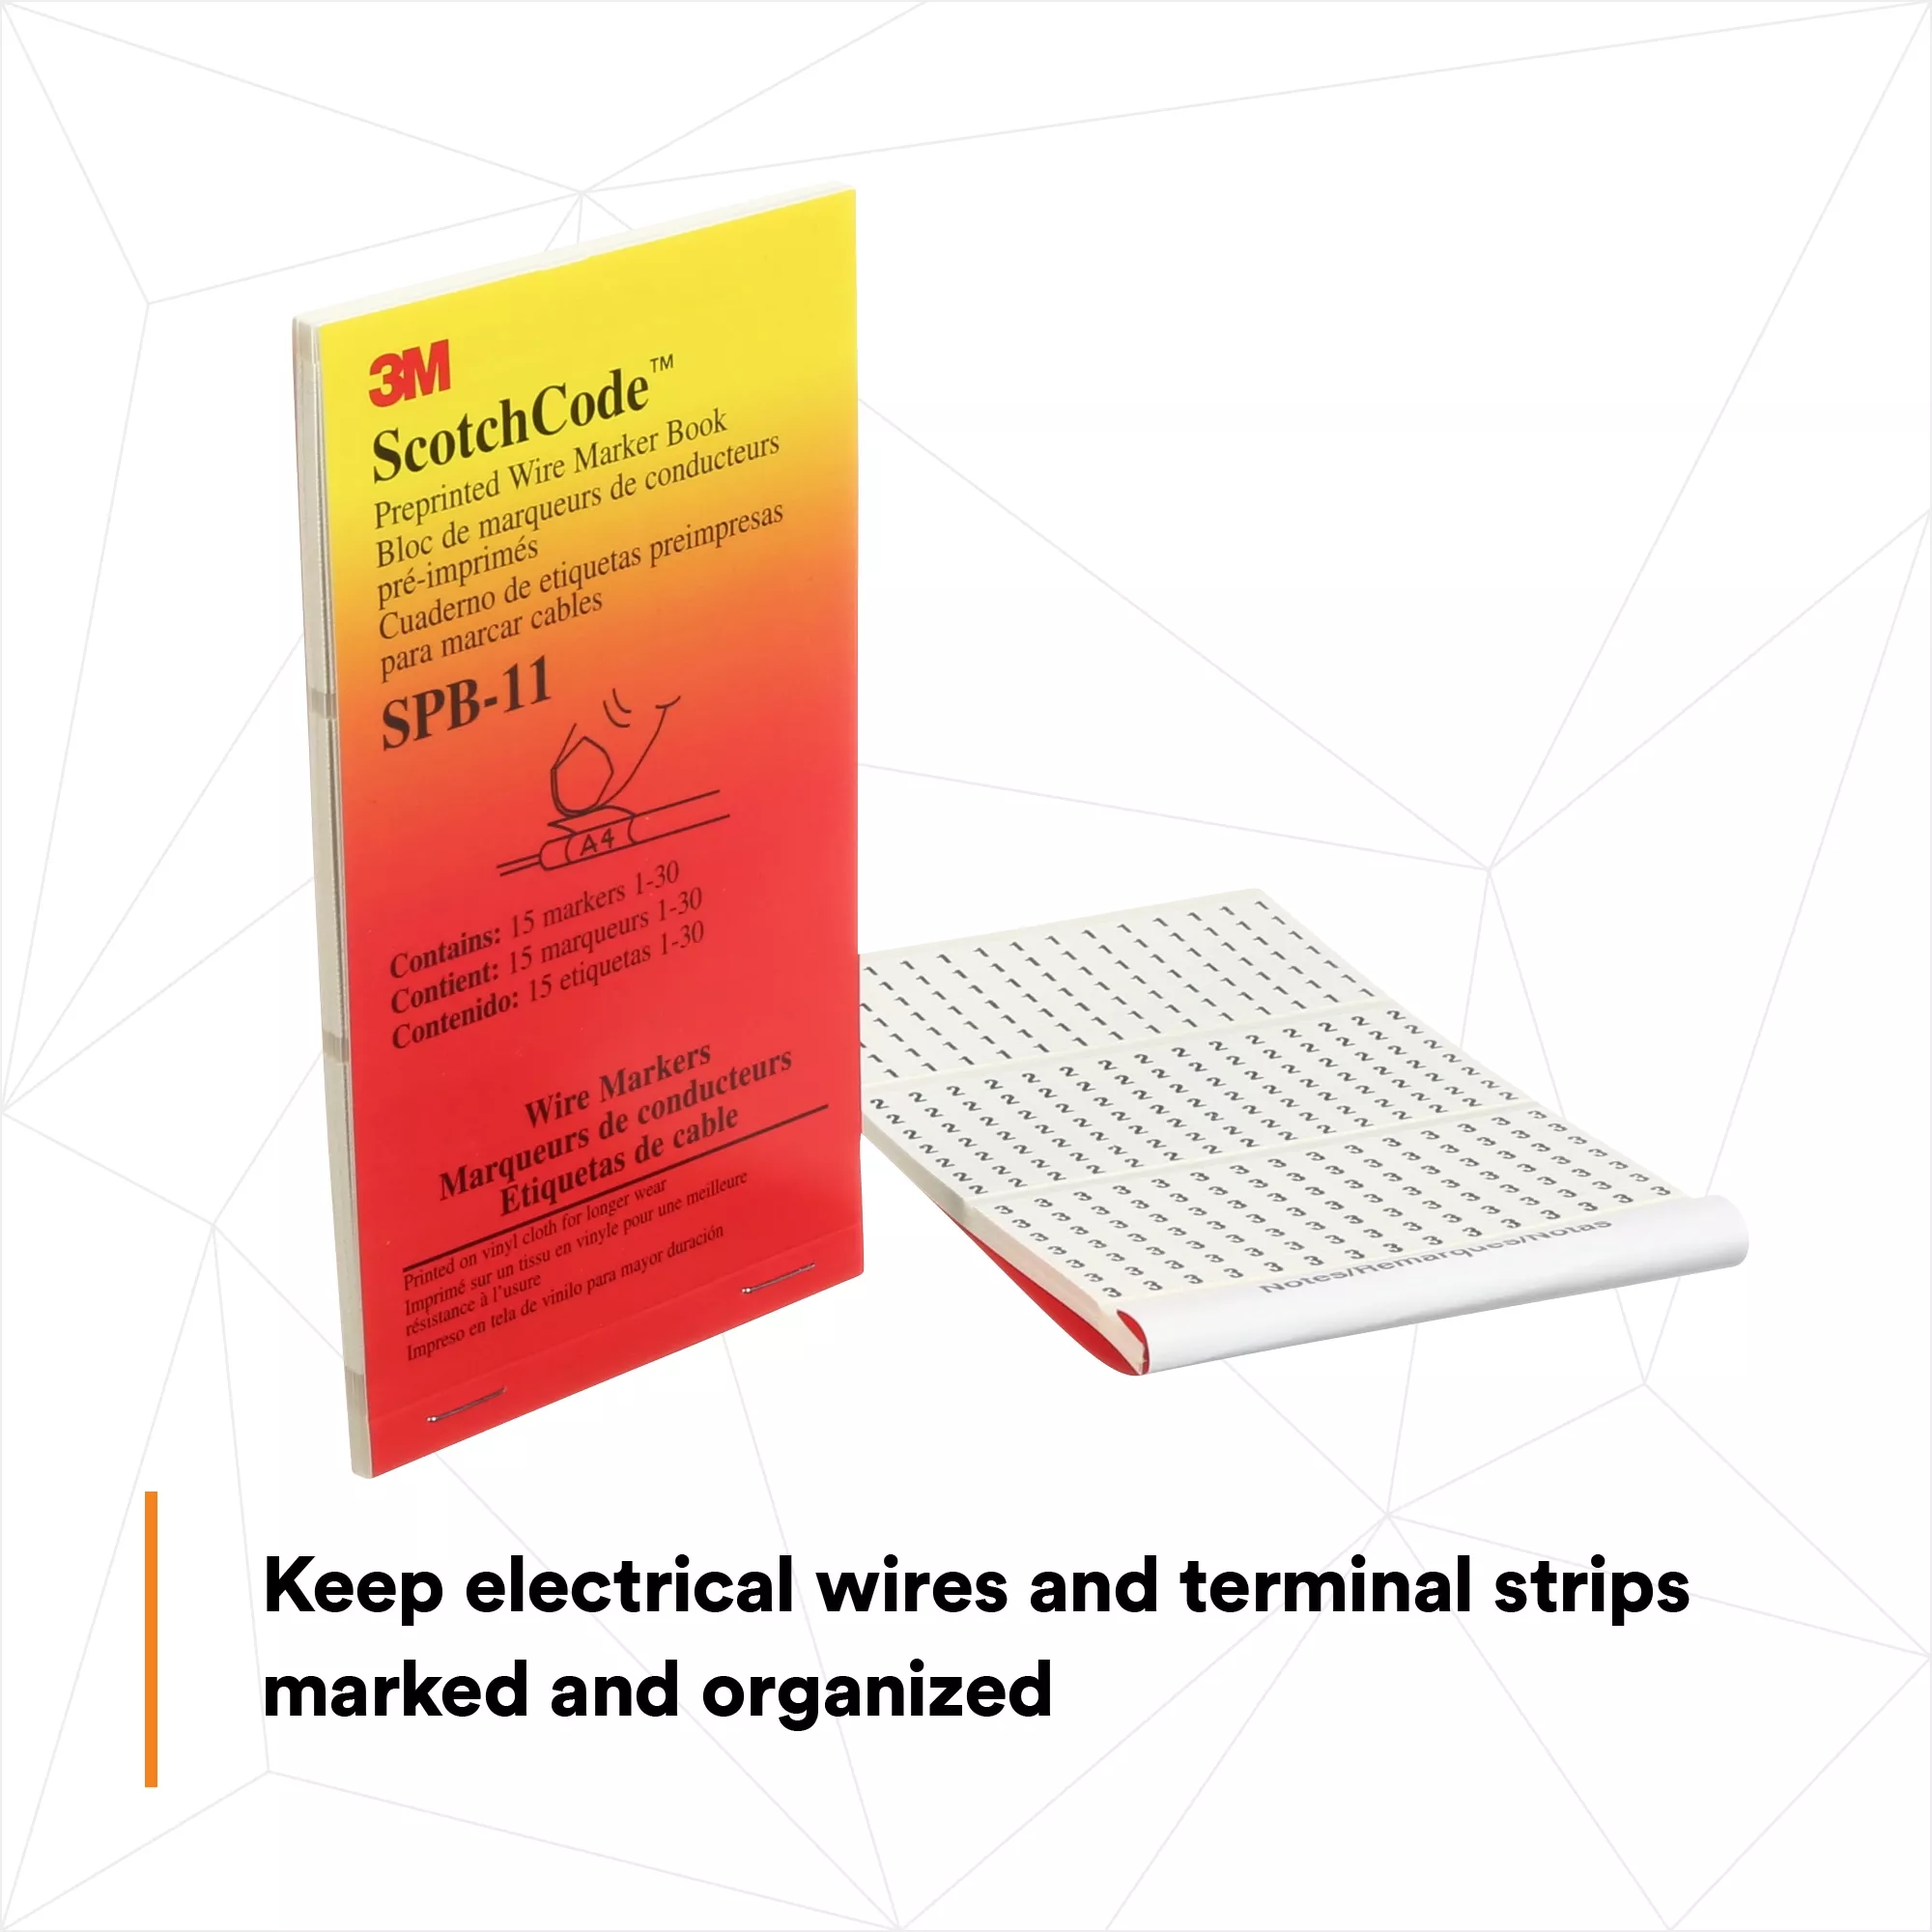 Product Number SPB-11 | 3M™ ScotchCode™ Pre-Printed Wire Marker Book SPB-11